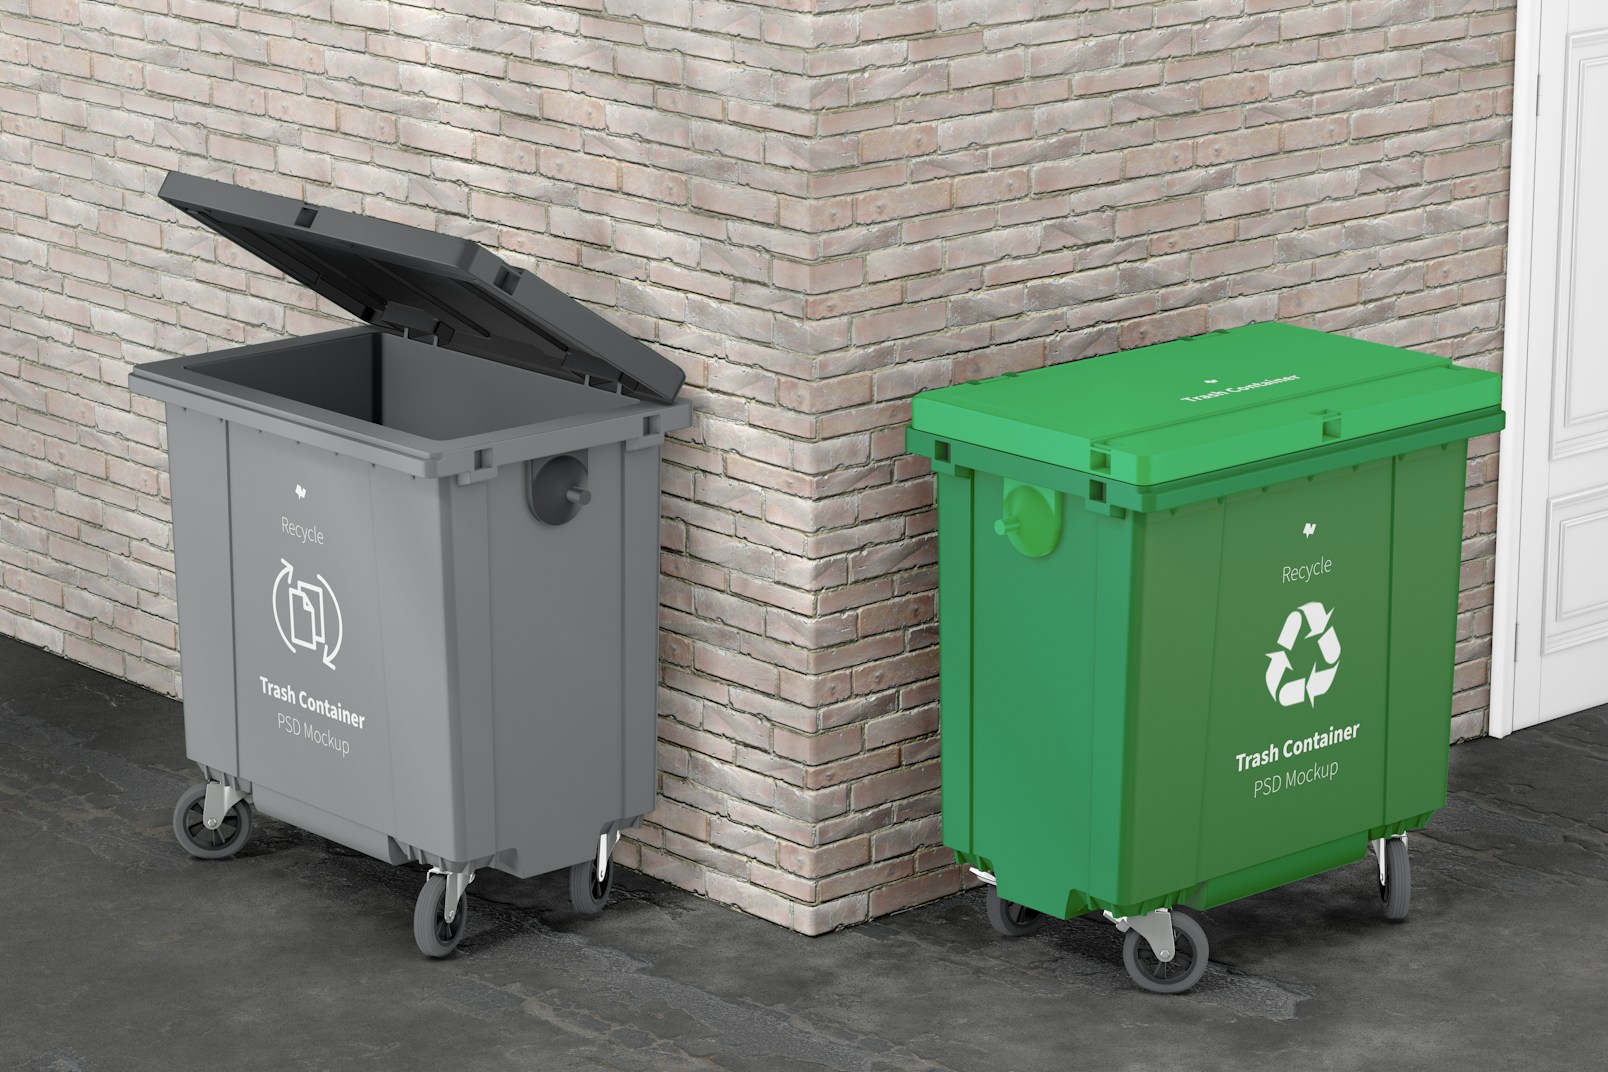 Trash Containers Mockup, Opened and Closed